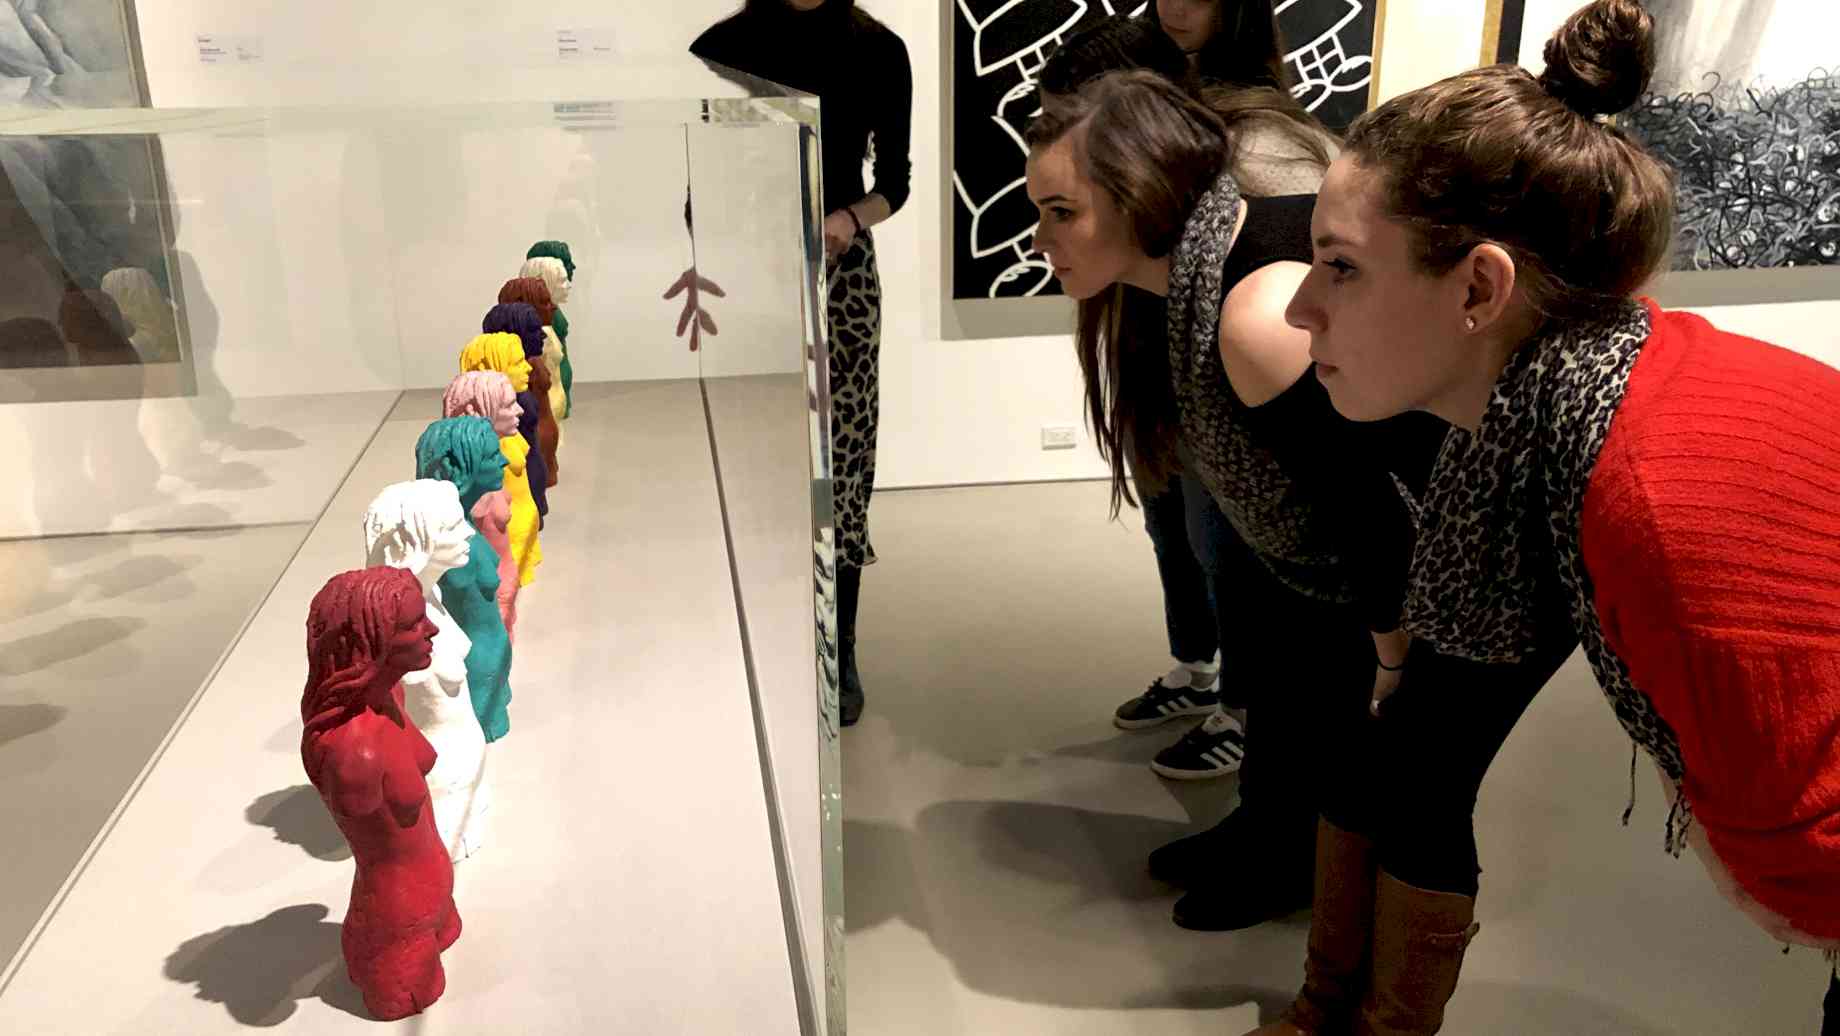 Museum Studies students look at sculptures in the Jewish Museum in New York City. [Alt text: Four women lean down to inspect a series of seven sculptures in a glass case. The sculptures are identical busts of a woman, in a rainbow of colors.]